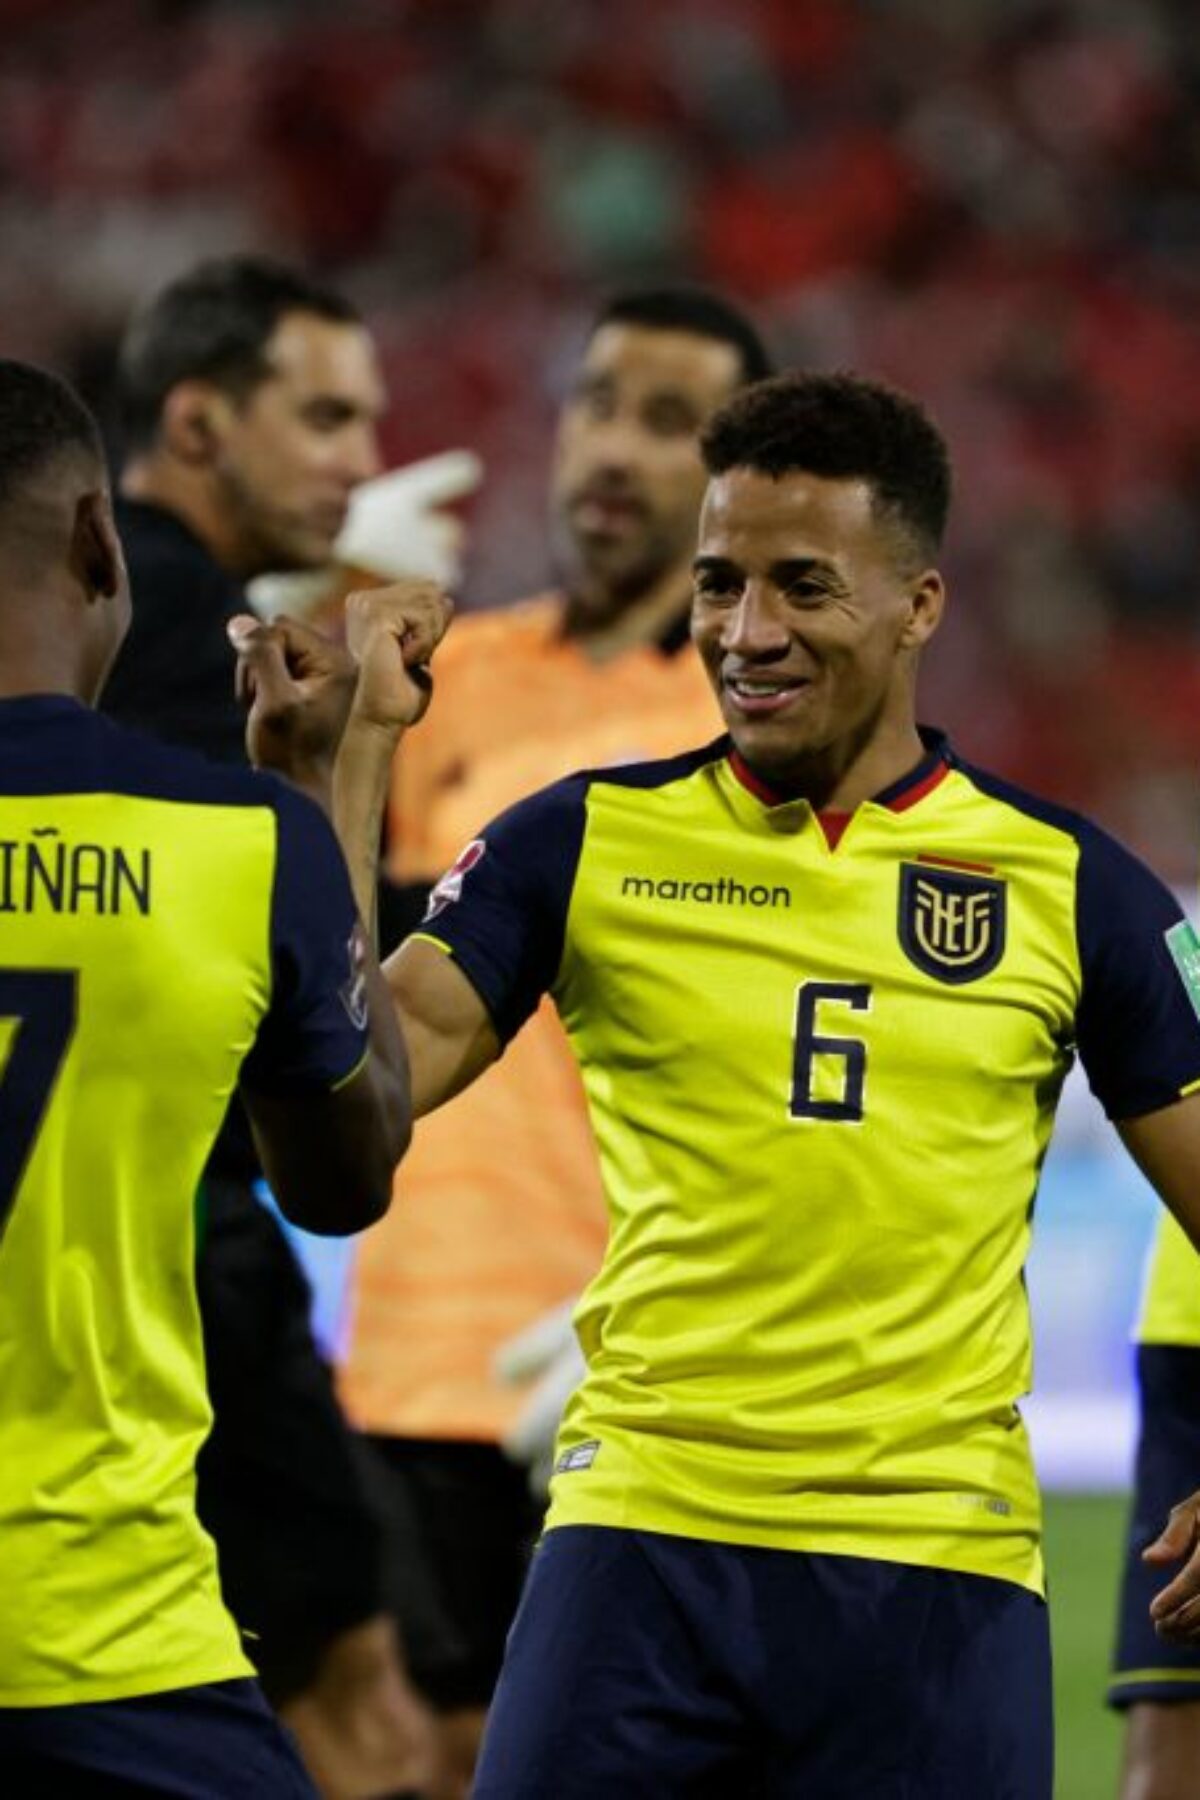 Ecuador's Pervis Estupinan (L) celebrates with teammate Byron Castillo after scoring against Chile during their South American qualification football match for the FIFA World Cup Qatar 2022 at the San Carlos de Apoquindo stadium in Santiago, on November 16, 2021. (Photo by ALBERTO VALDES / POOL / AFP) (Photo by ALBERTO VALDES/POOL/AFP via Getty Images)